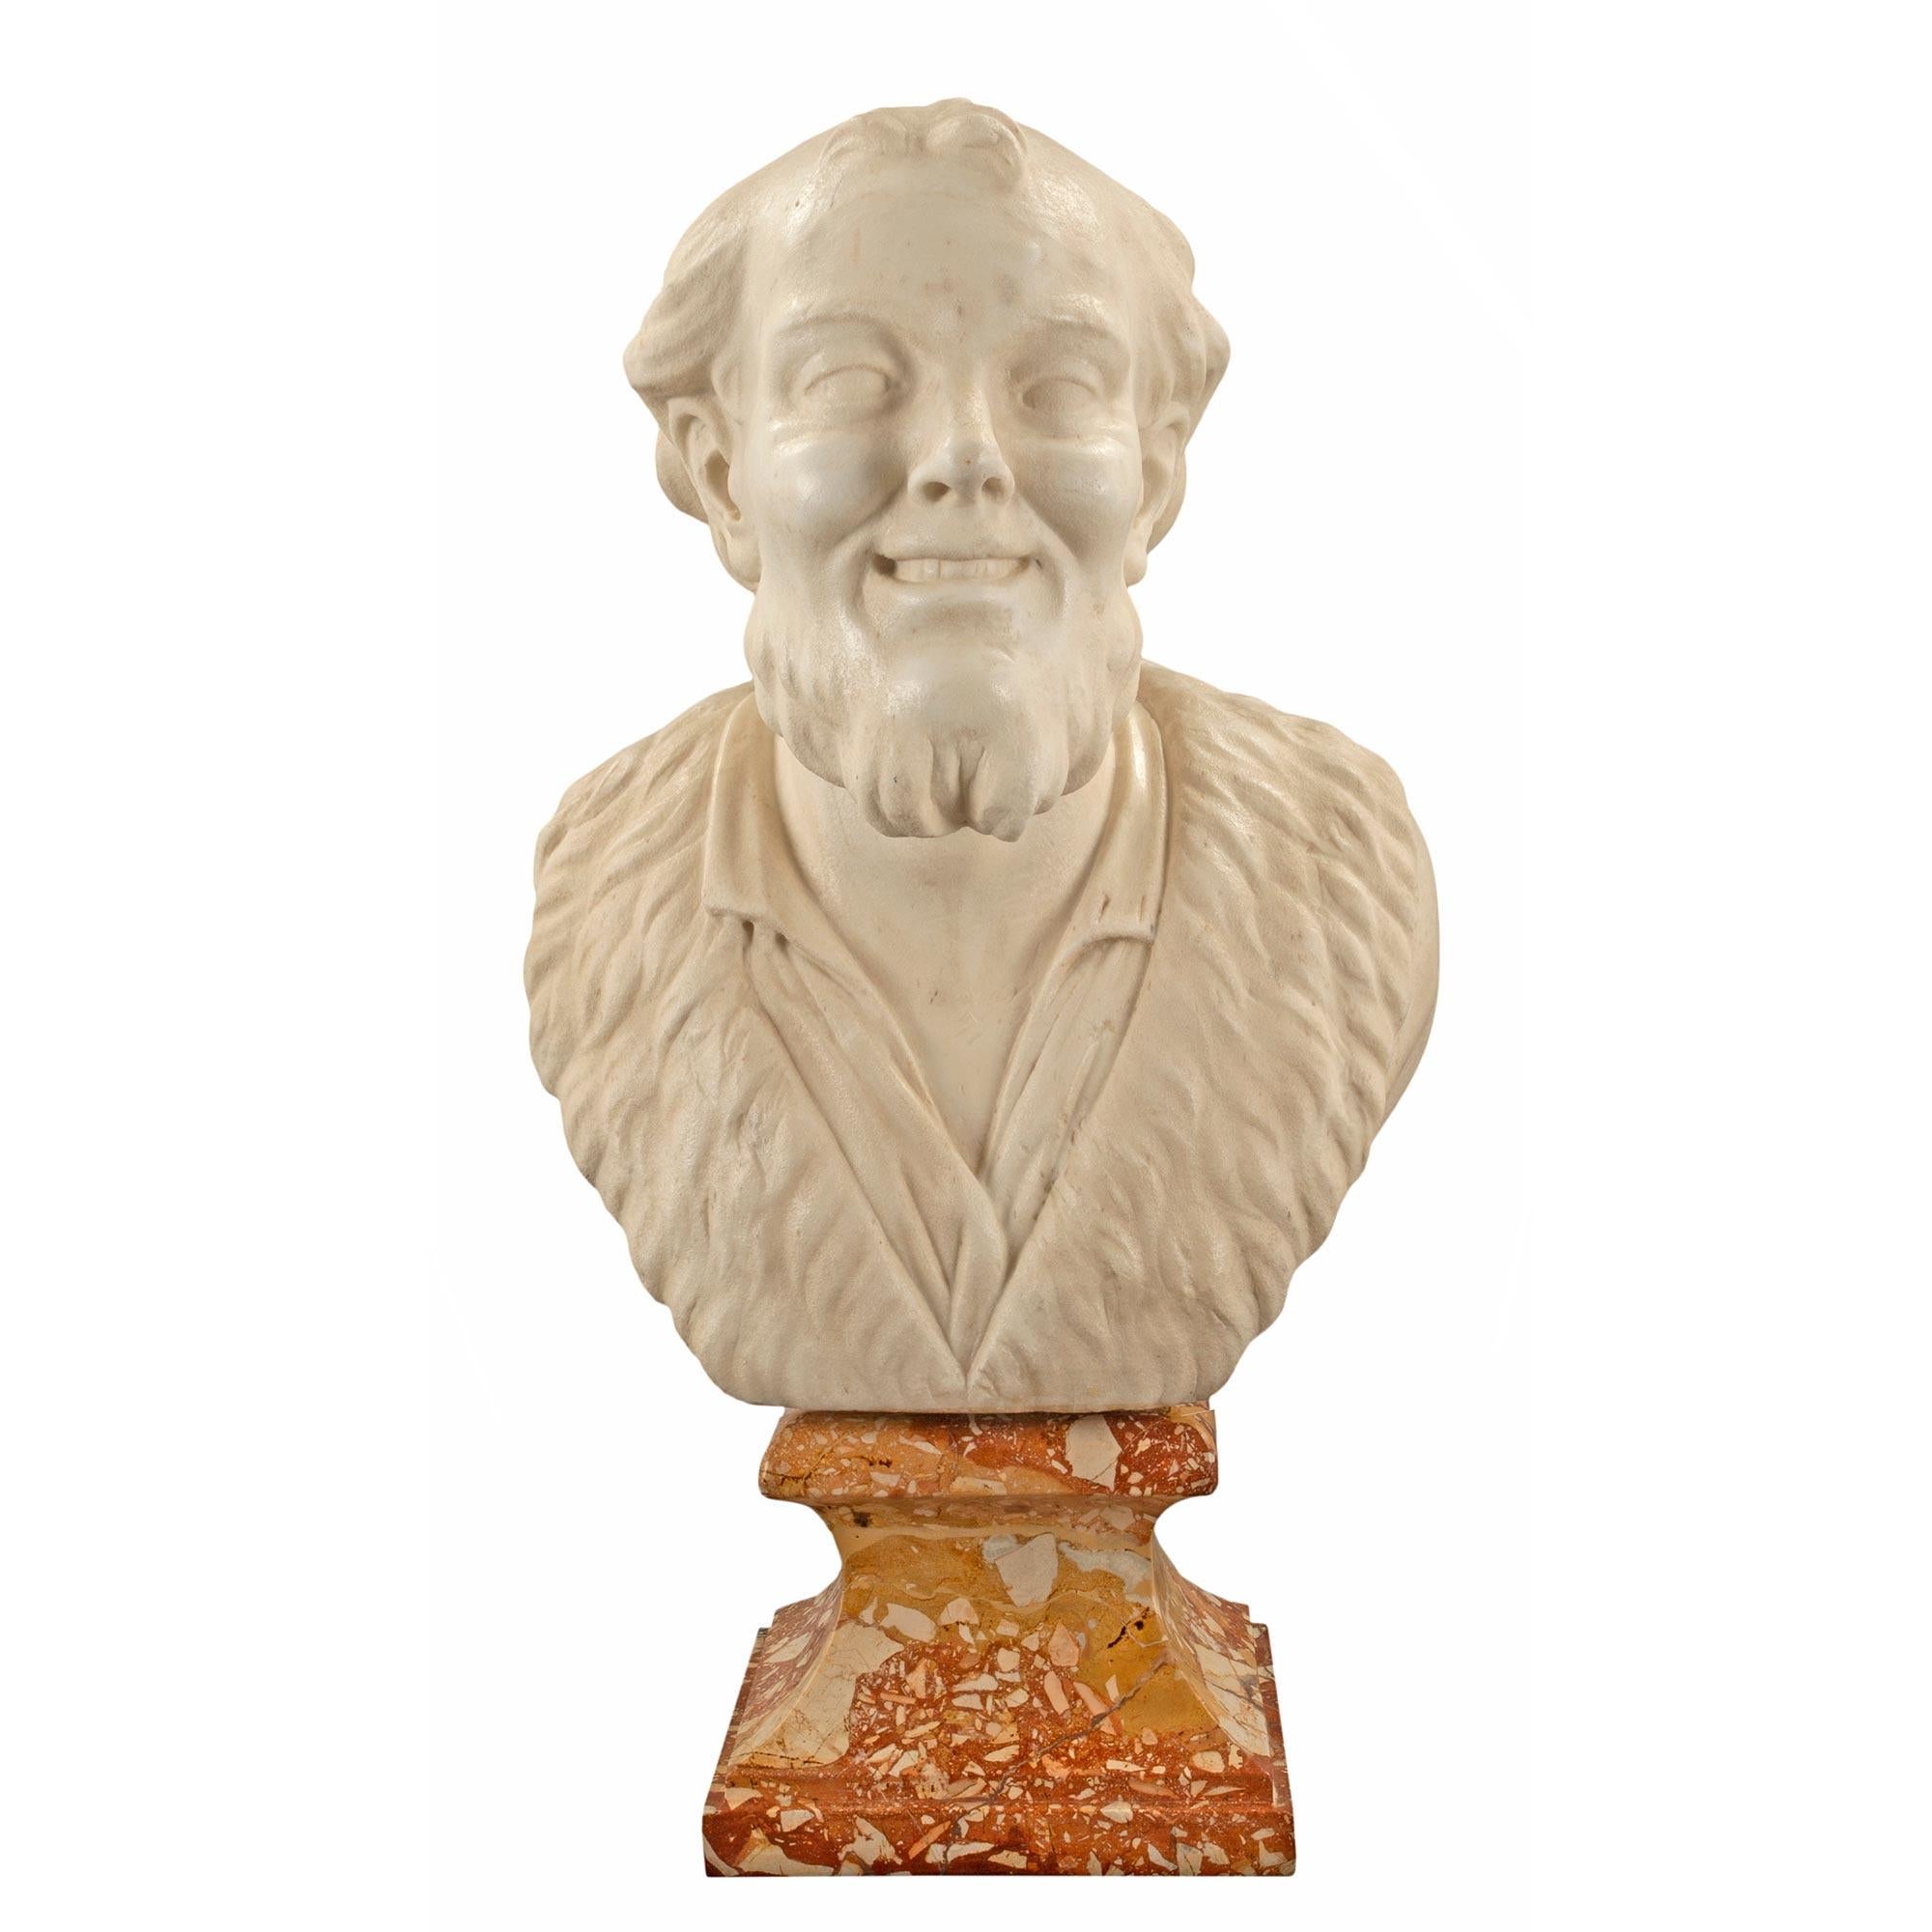 A handsome pair of Italian 18th century marble busts of Democritus and Heraclitus. The busts are in white Carrara marble and raised by rectangular mottled tapered Breccia Gialla marble socles. Each Philosopher is wearing formal attire with wonderful